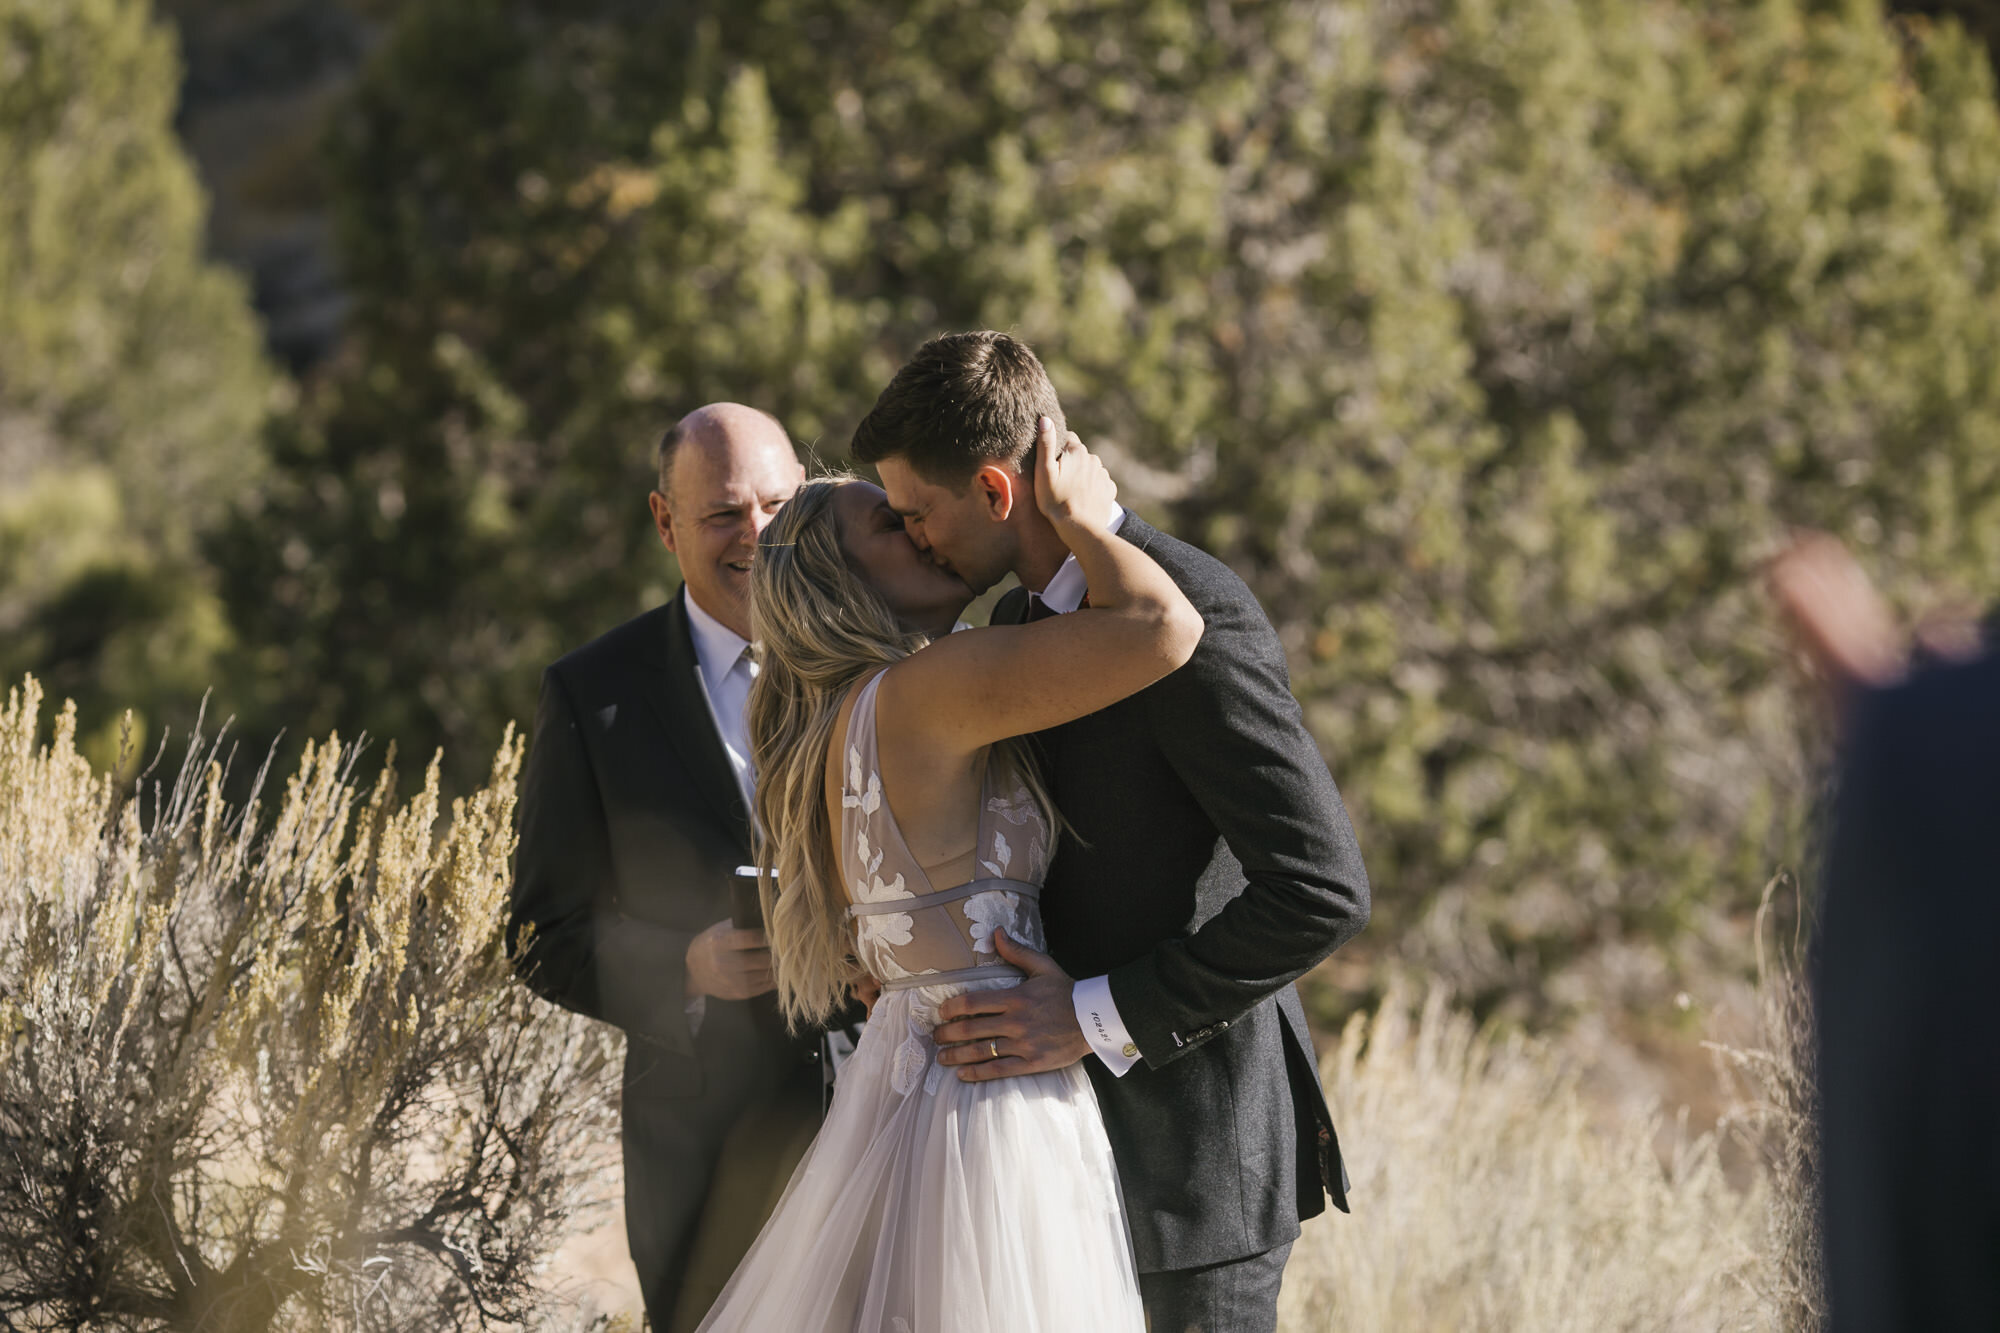 Bride and groom share their first kiss after getting married in the Utah desert